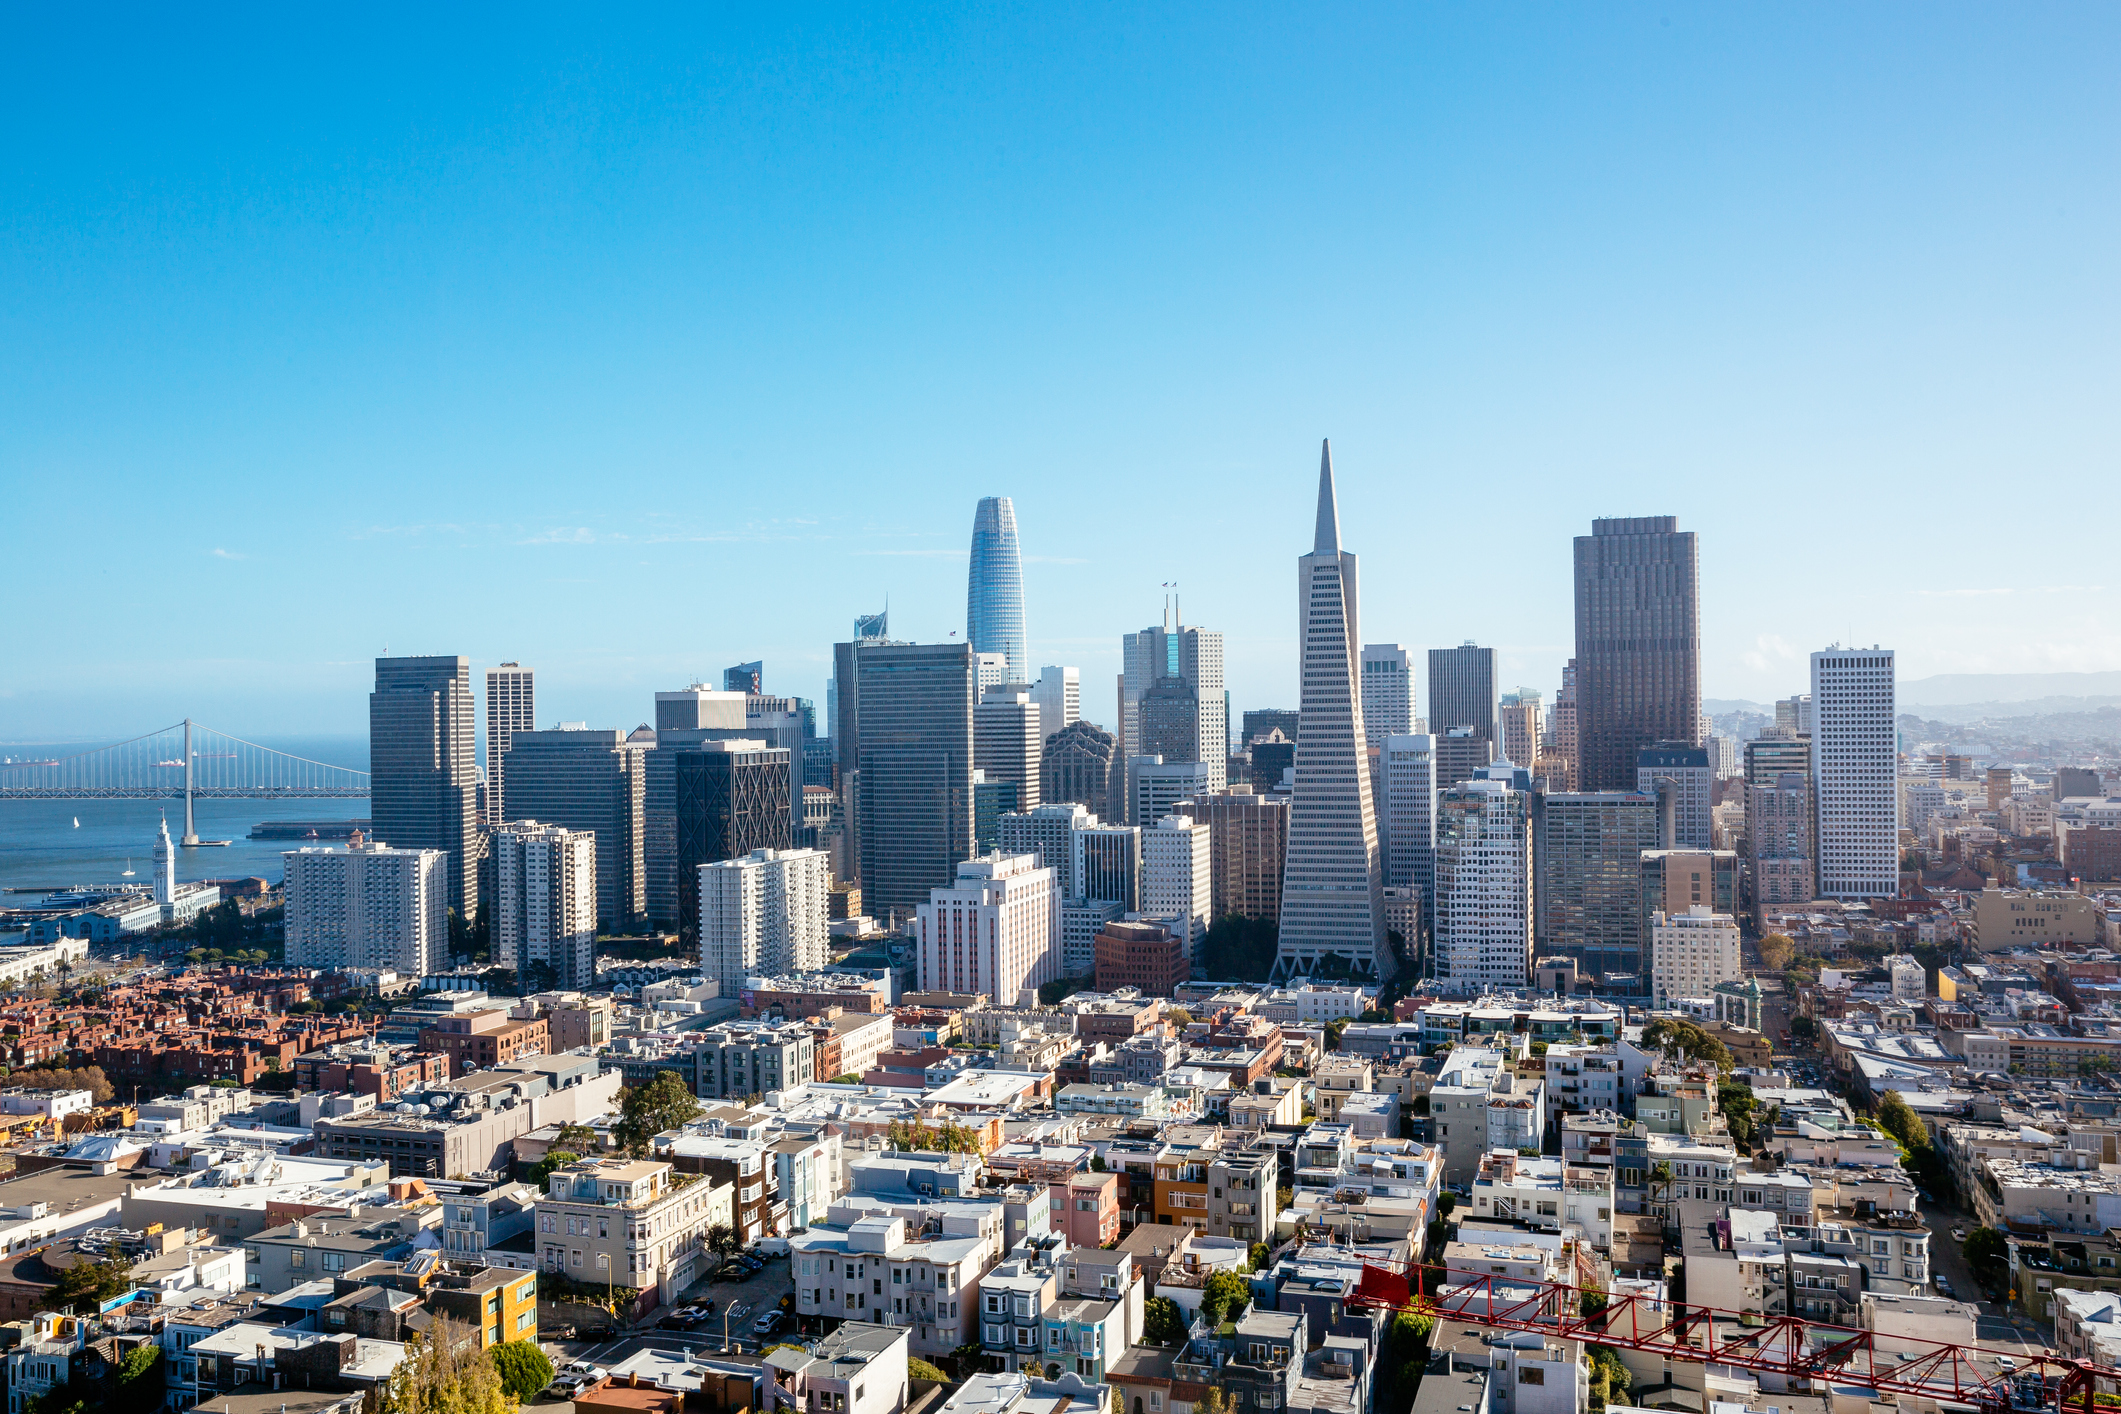 San Francisco Races To Clean Up Its Act for Trade Summit